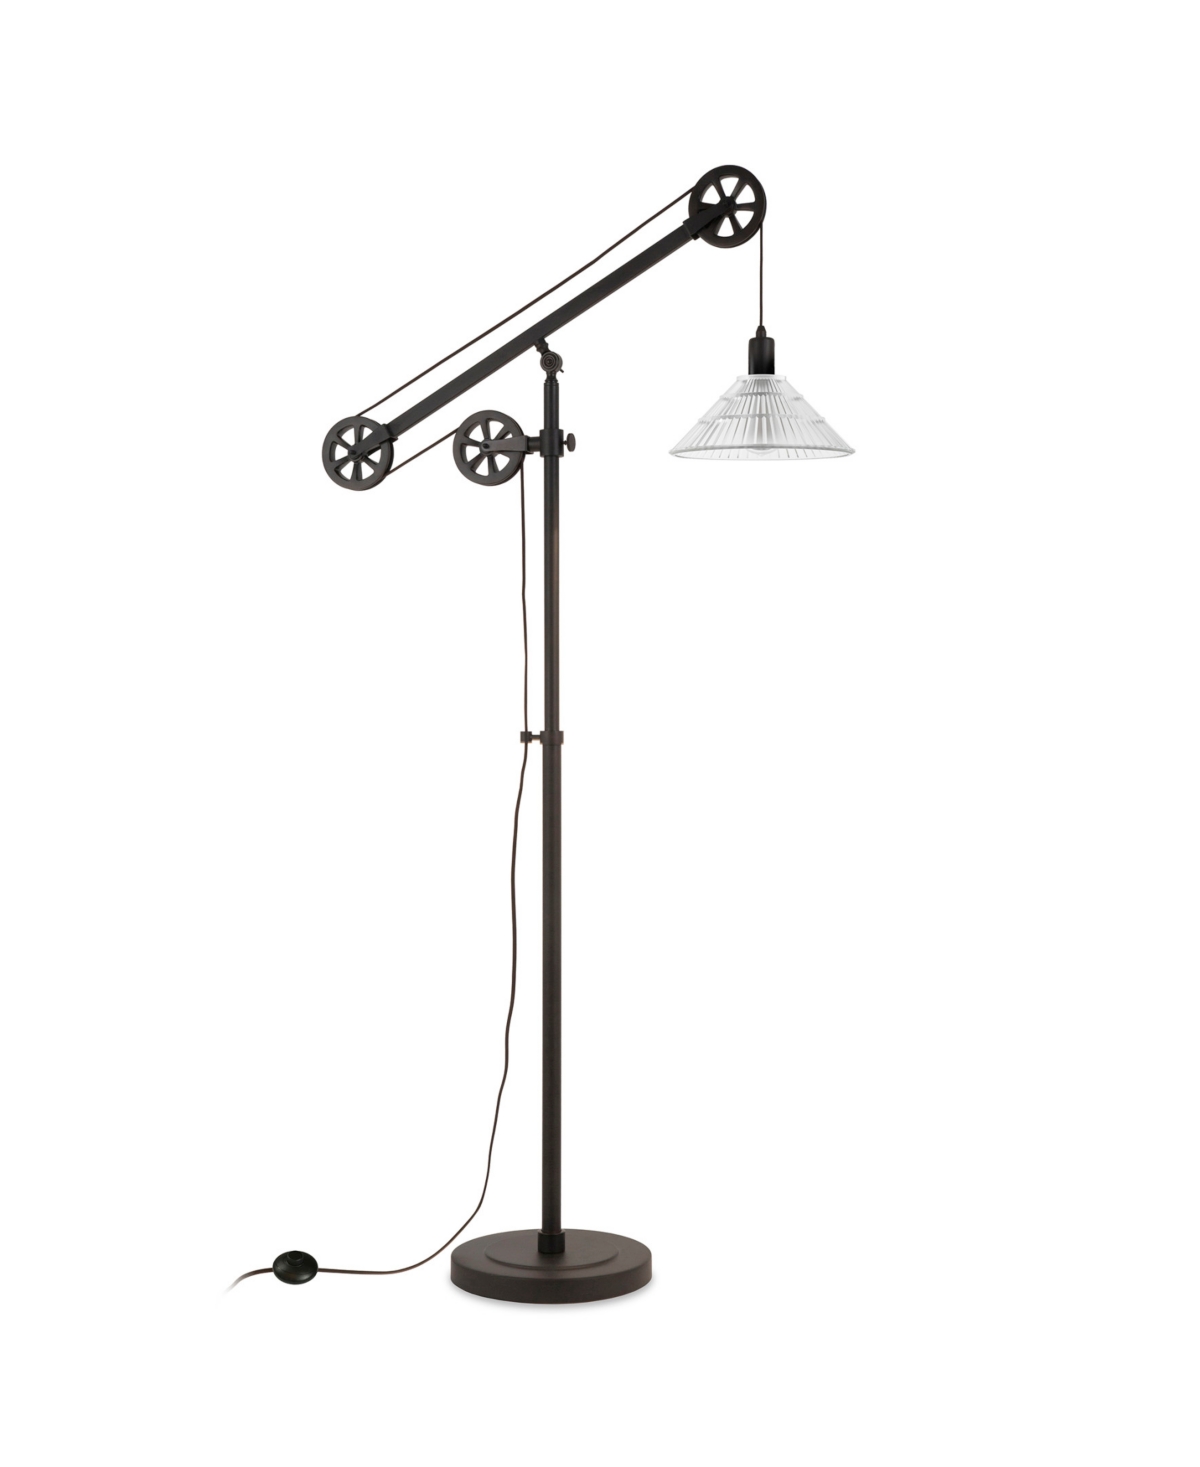 Hudson & Canal Descartes 70" Ribbed Glass Shade Pulley System Floor Lamp In Blackened Bronze